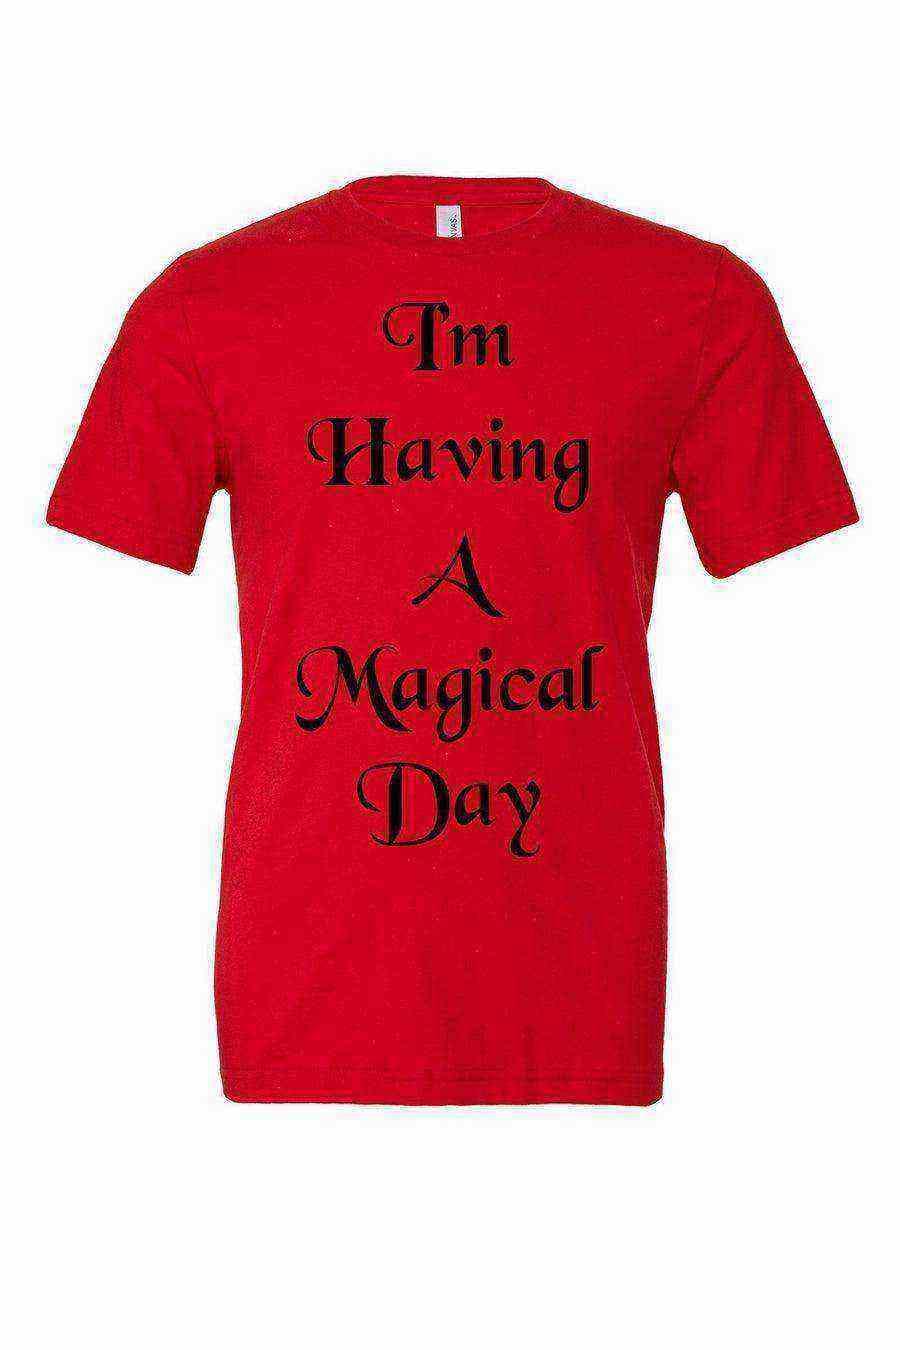 Toddler | Im Having A Magical Day - Dylan's Tees